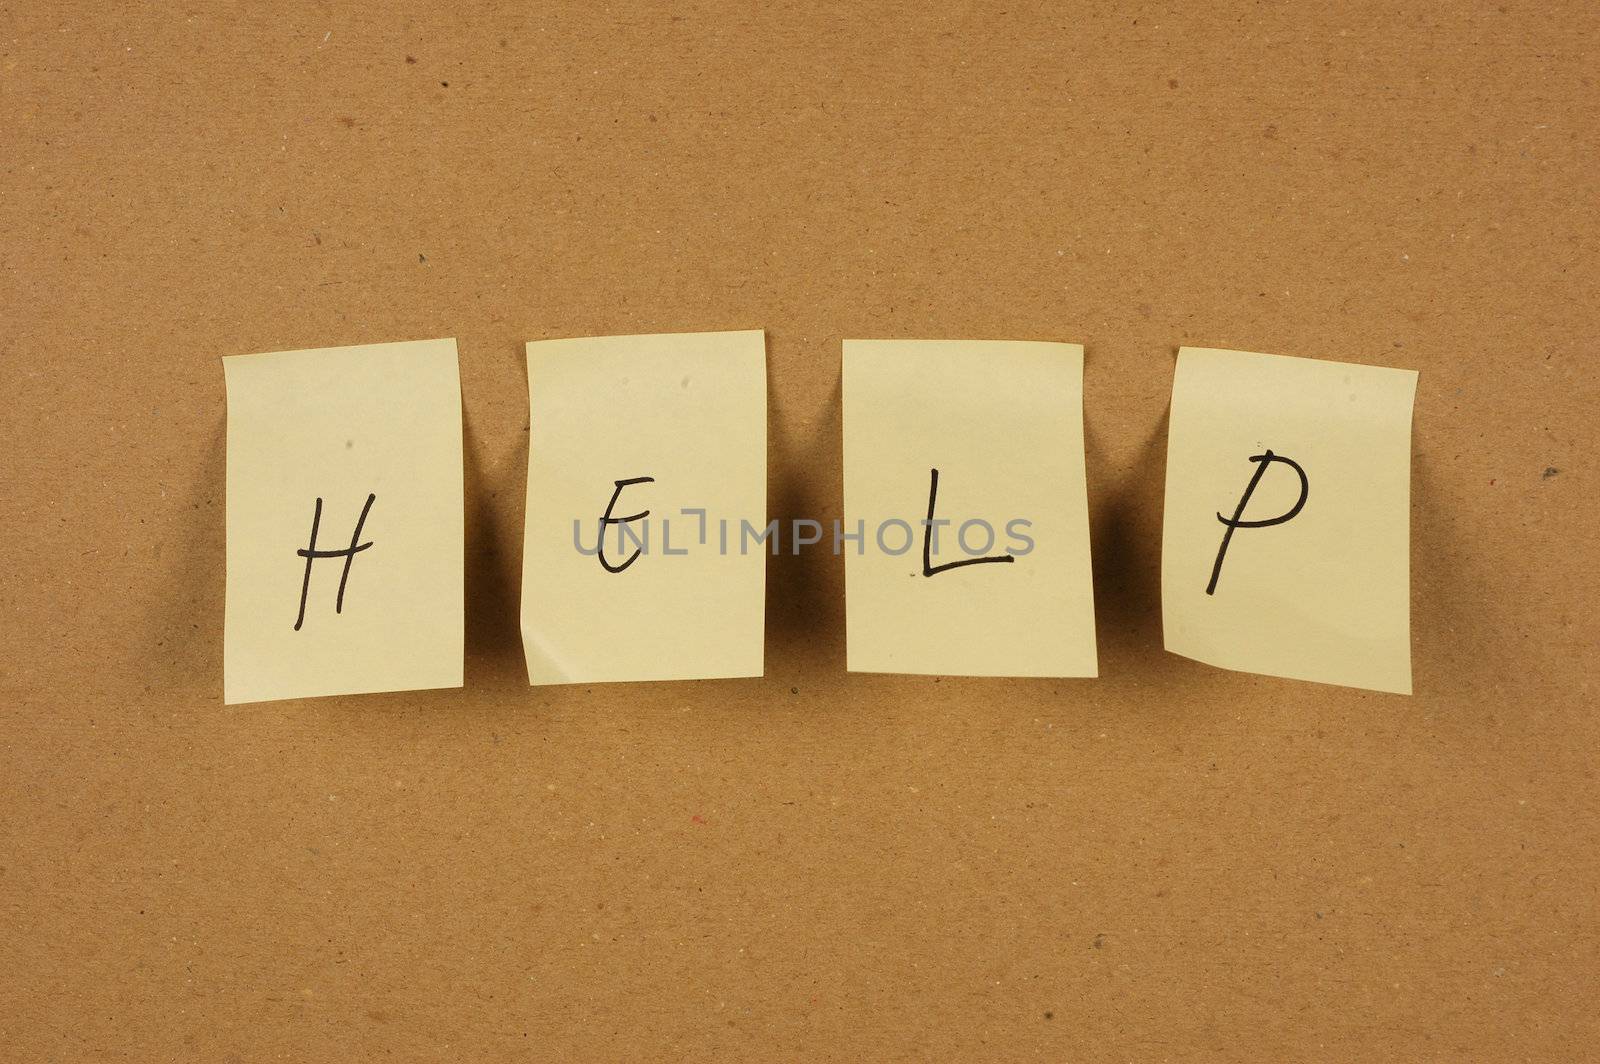 writing help is spelled in a sheet of paper affixed to the wall brown carton by antonihalim